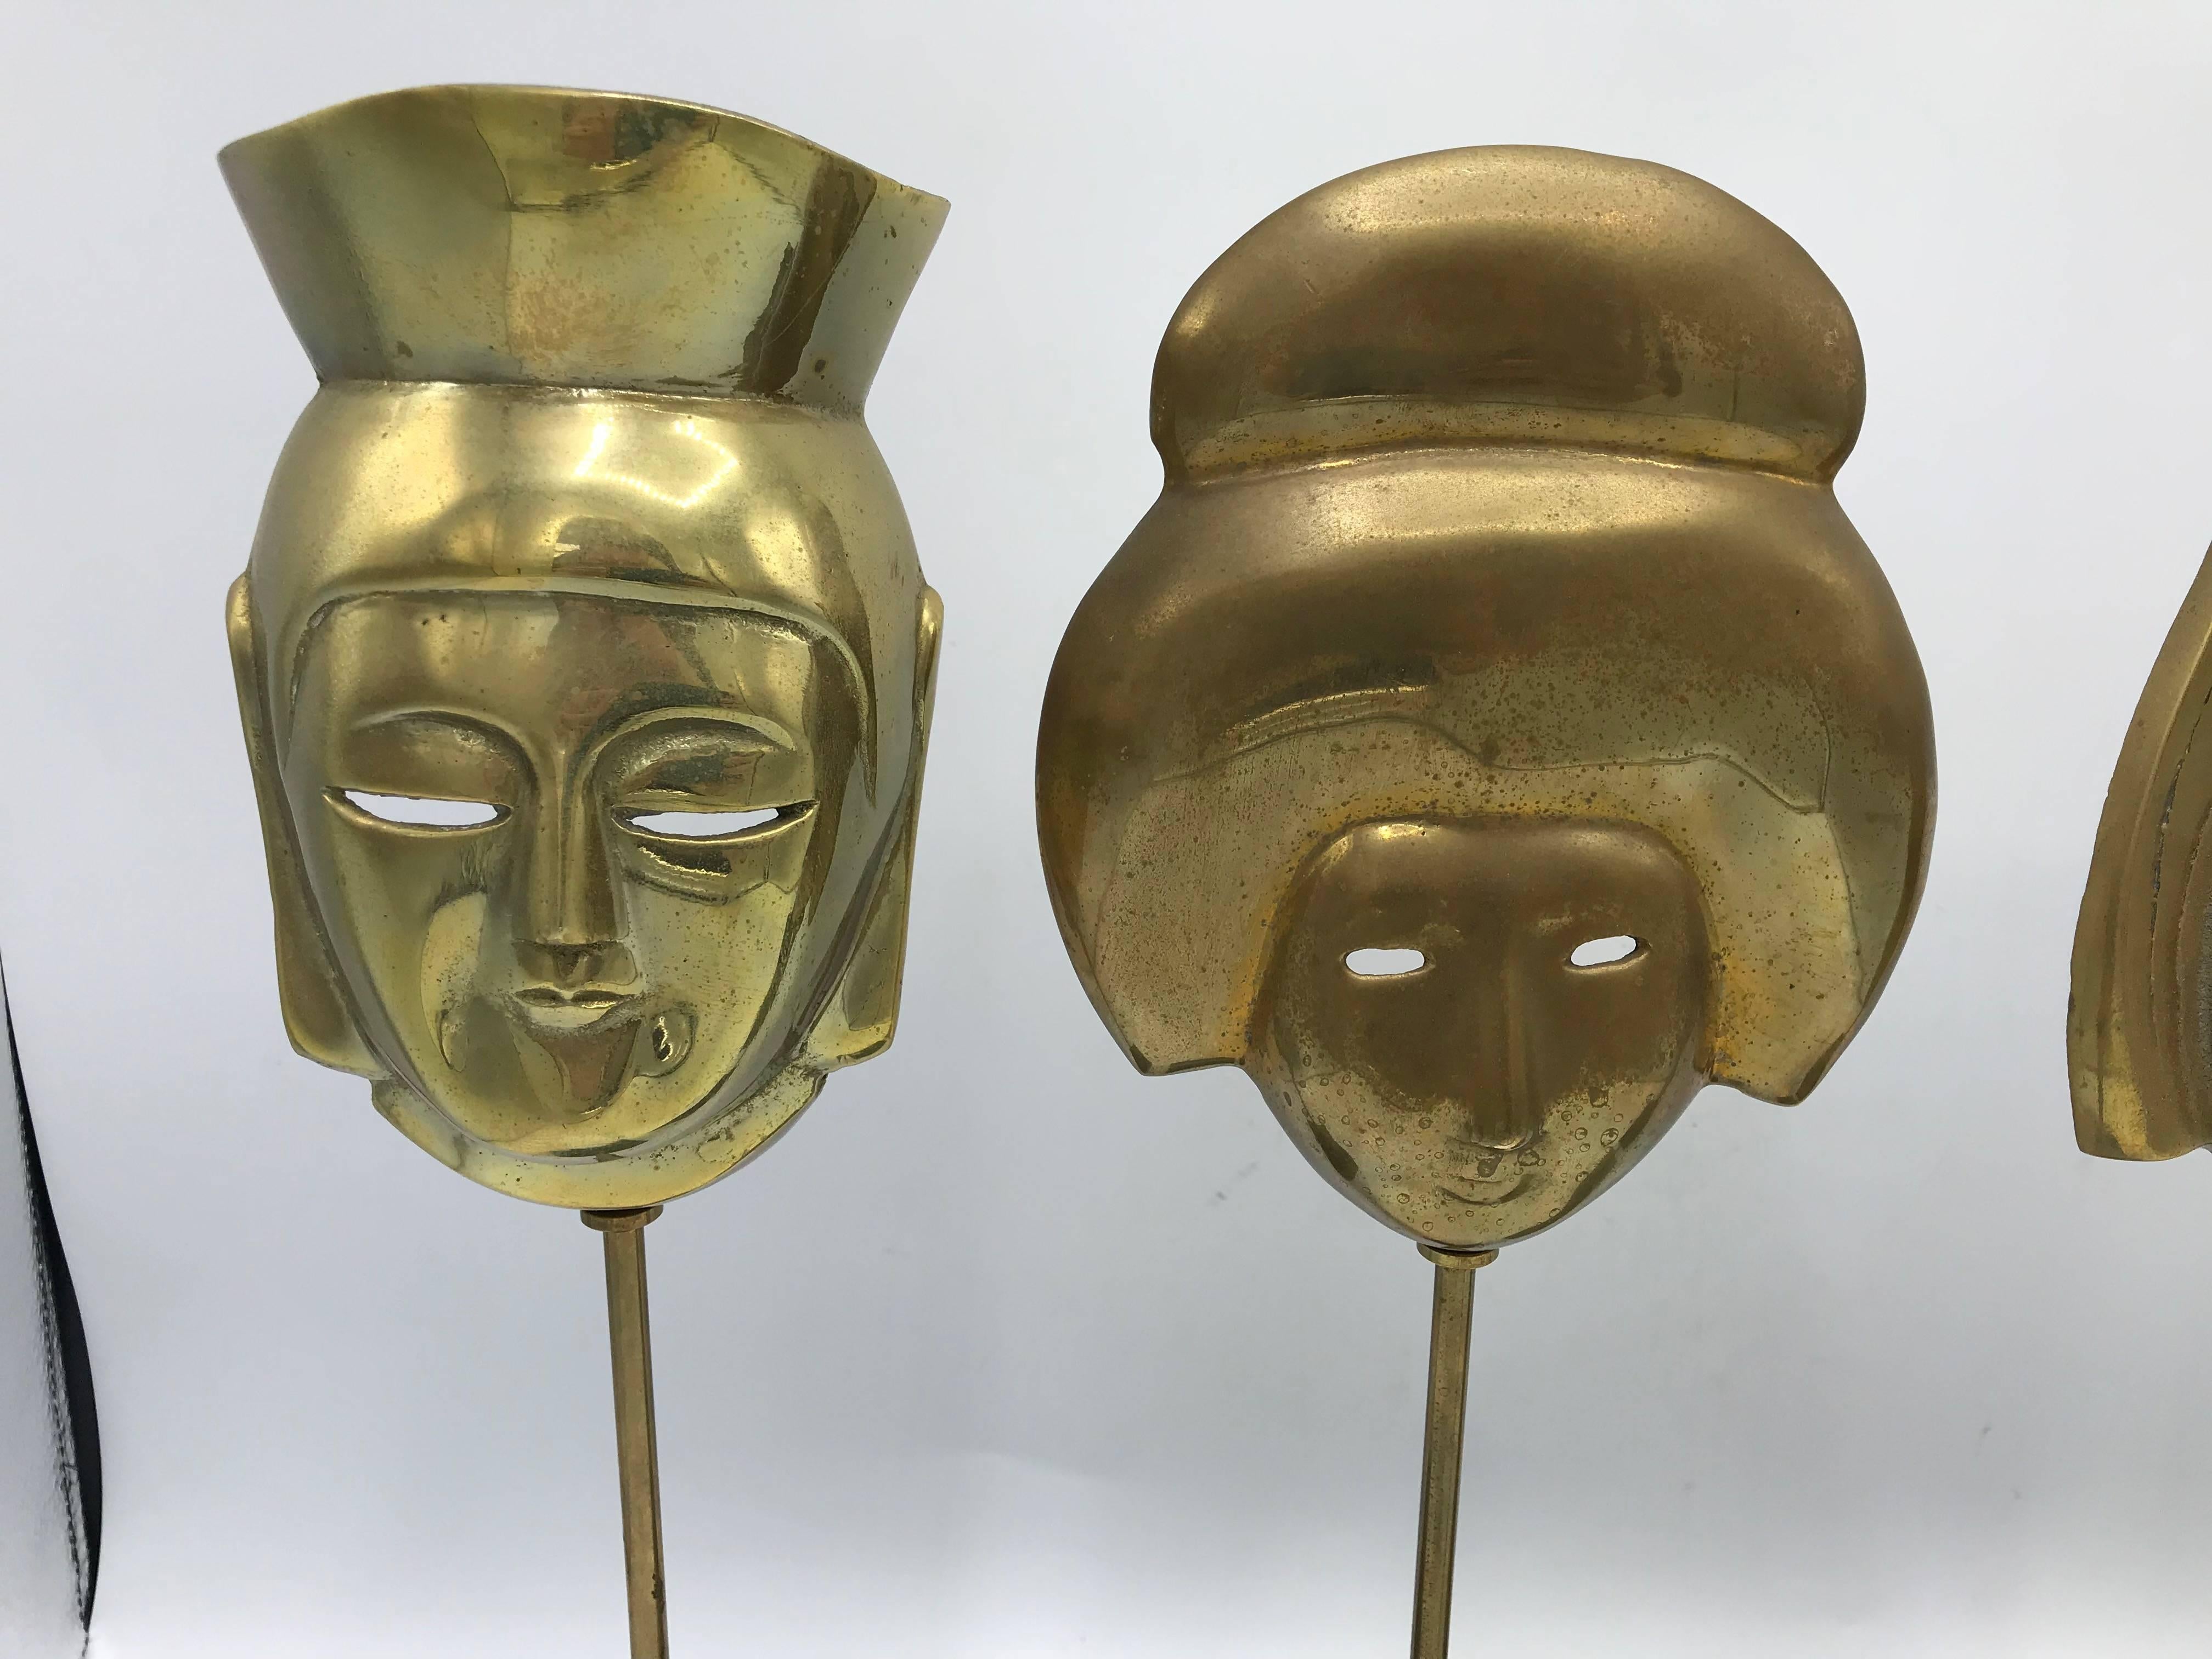 Offered is a stunning, set of four, 1960s, Italian modern brass Asian mask sculptures. Perfect for a bookcase or mantel! Truly beautiful pieces. Bases are 3